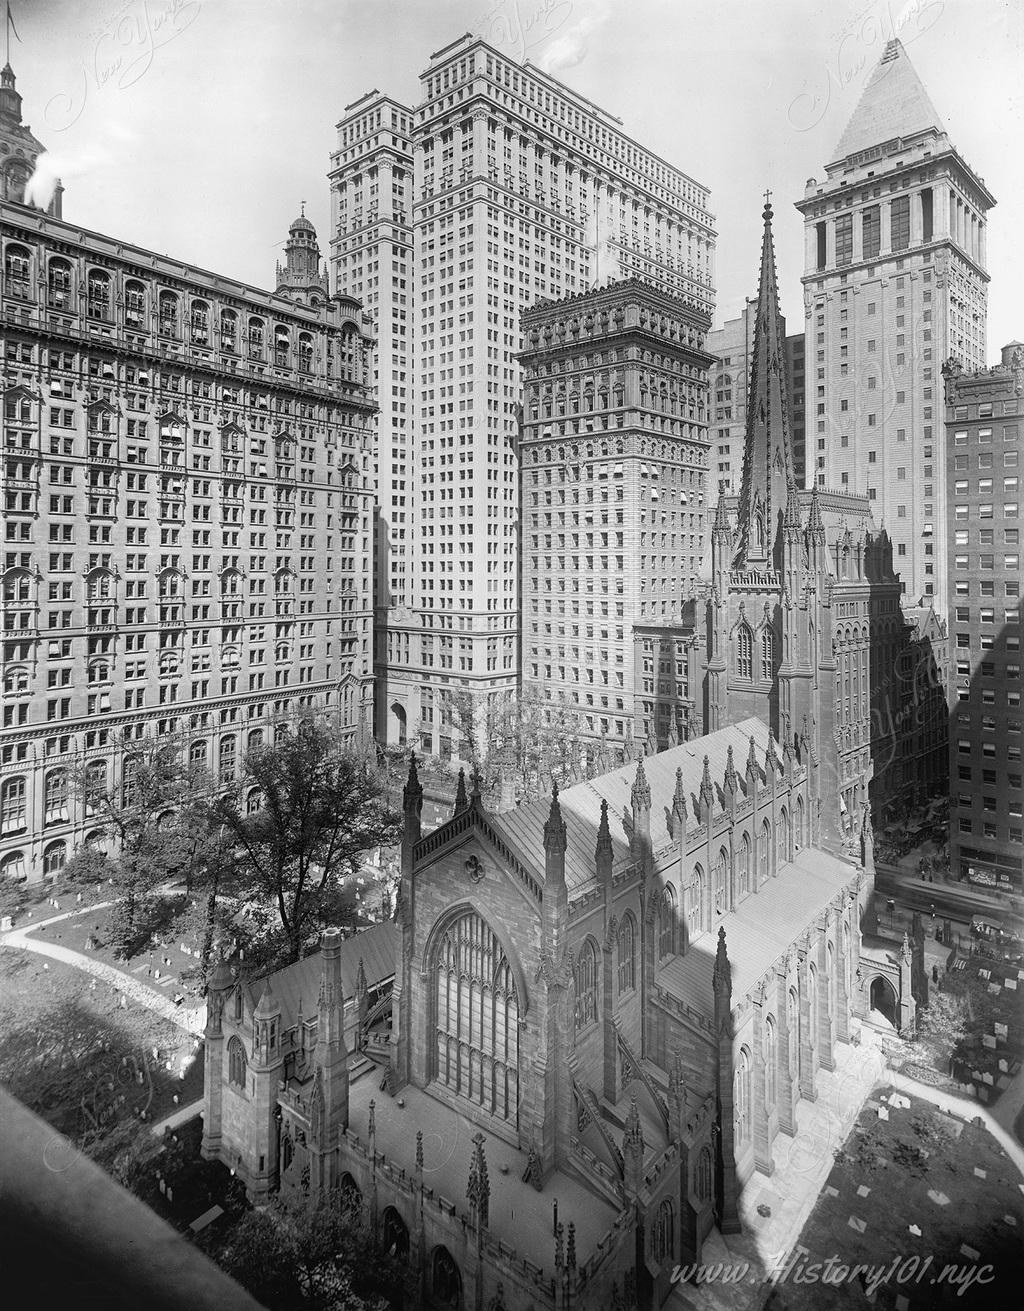 Photograph of an elevated perspective of Trinity Church and its surrounding buildings.